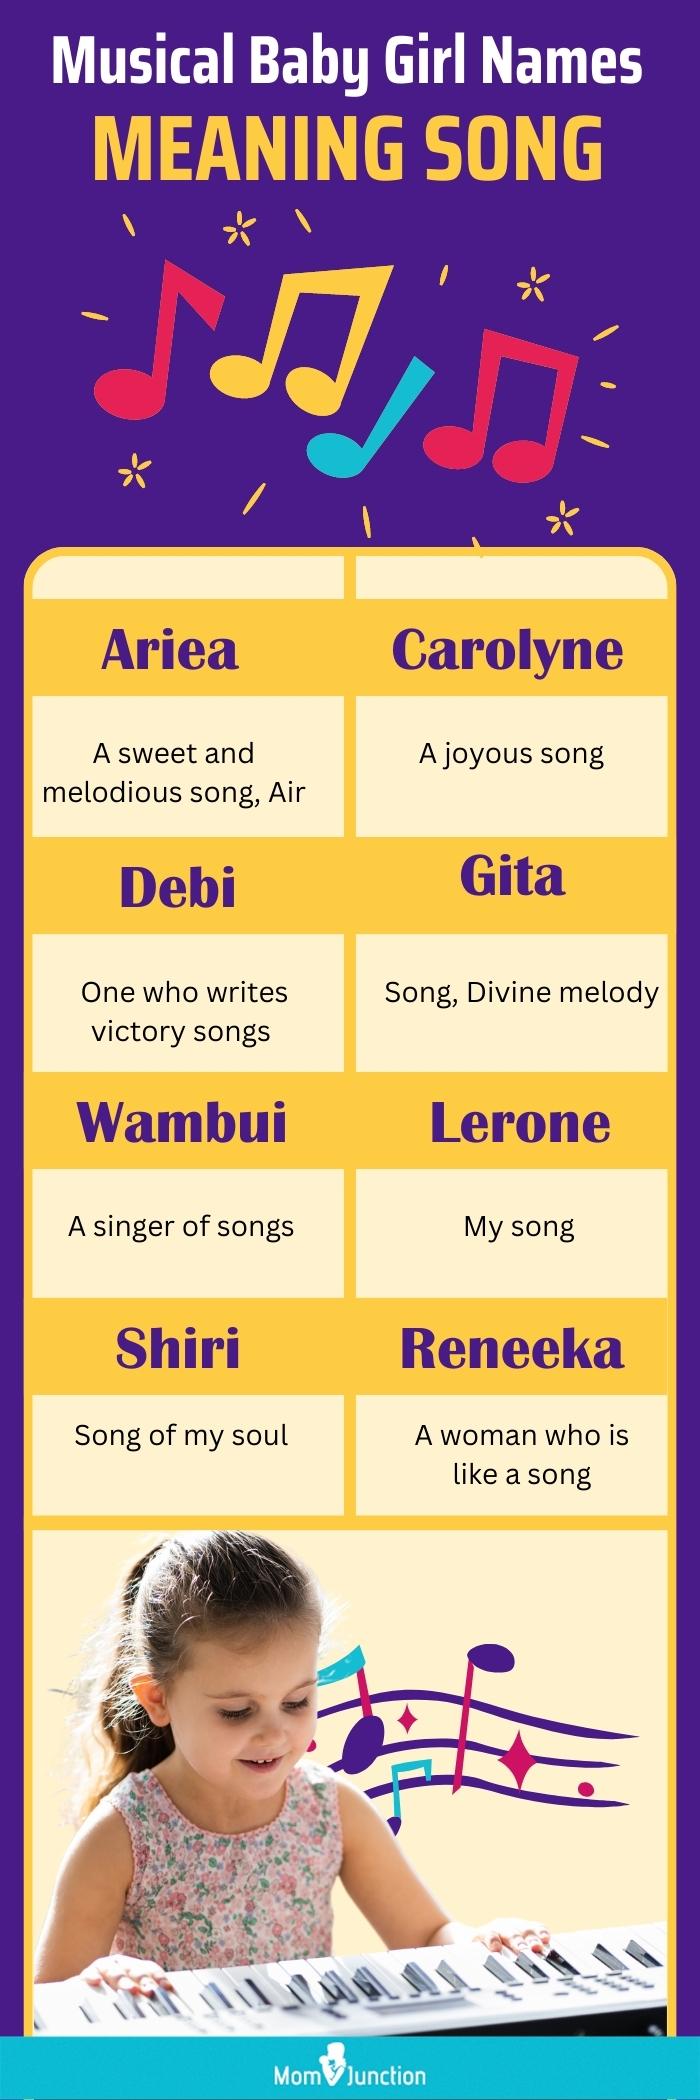 musical baby girl names meaning song (infographic)